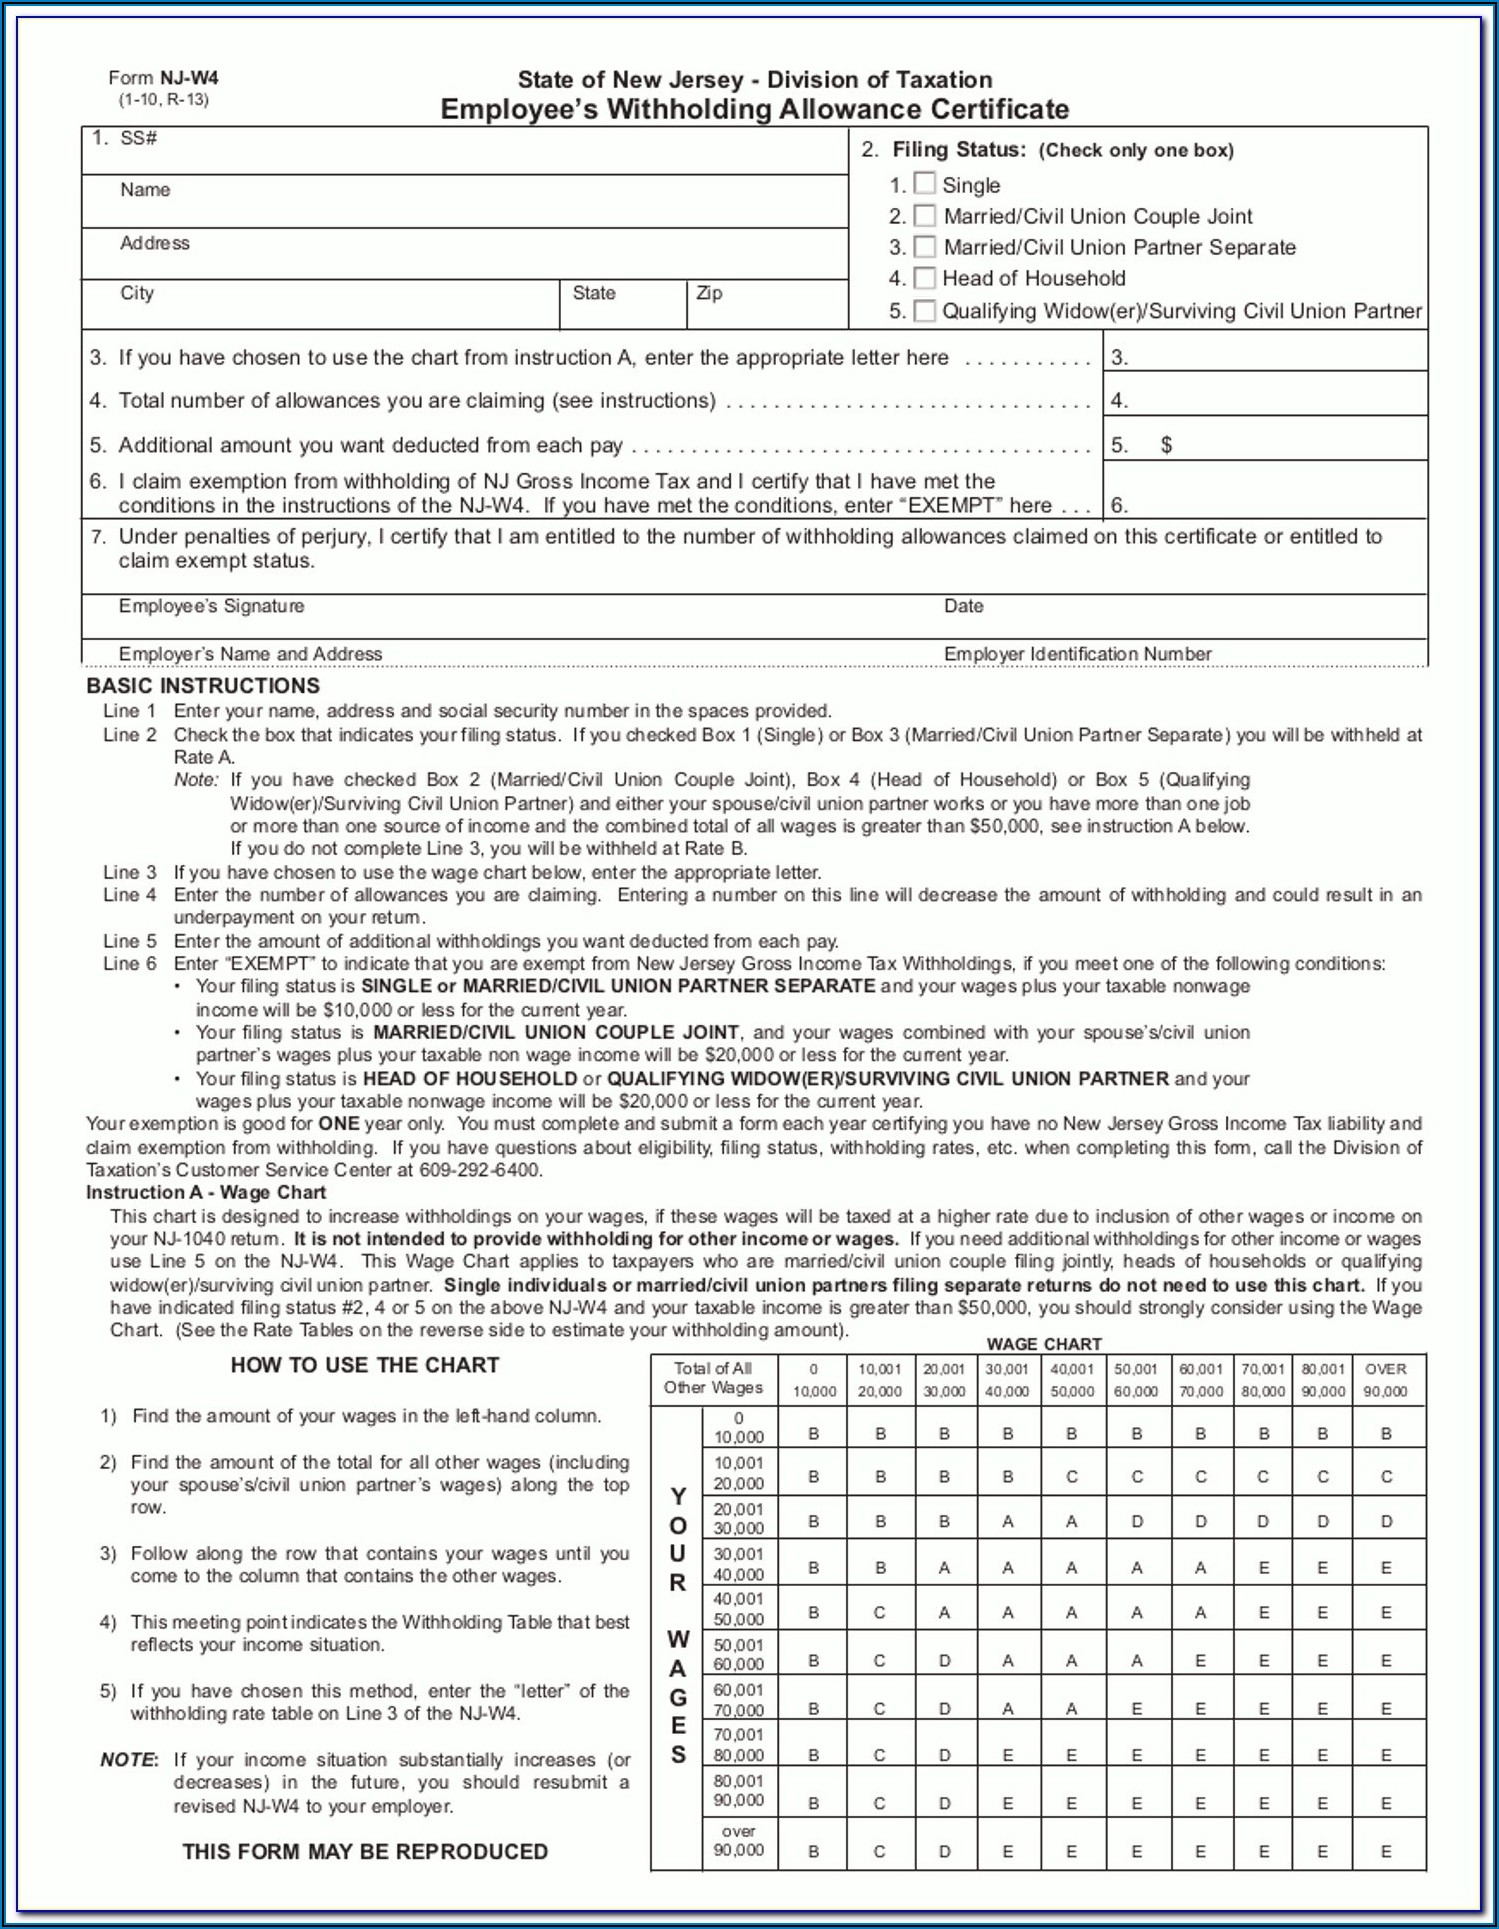 Foreclosure Cleanup Bid Forms